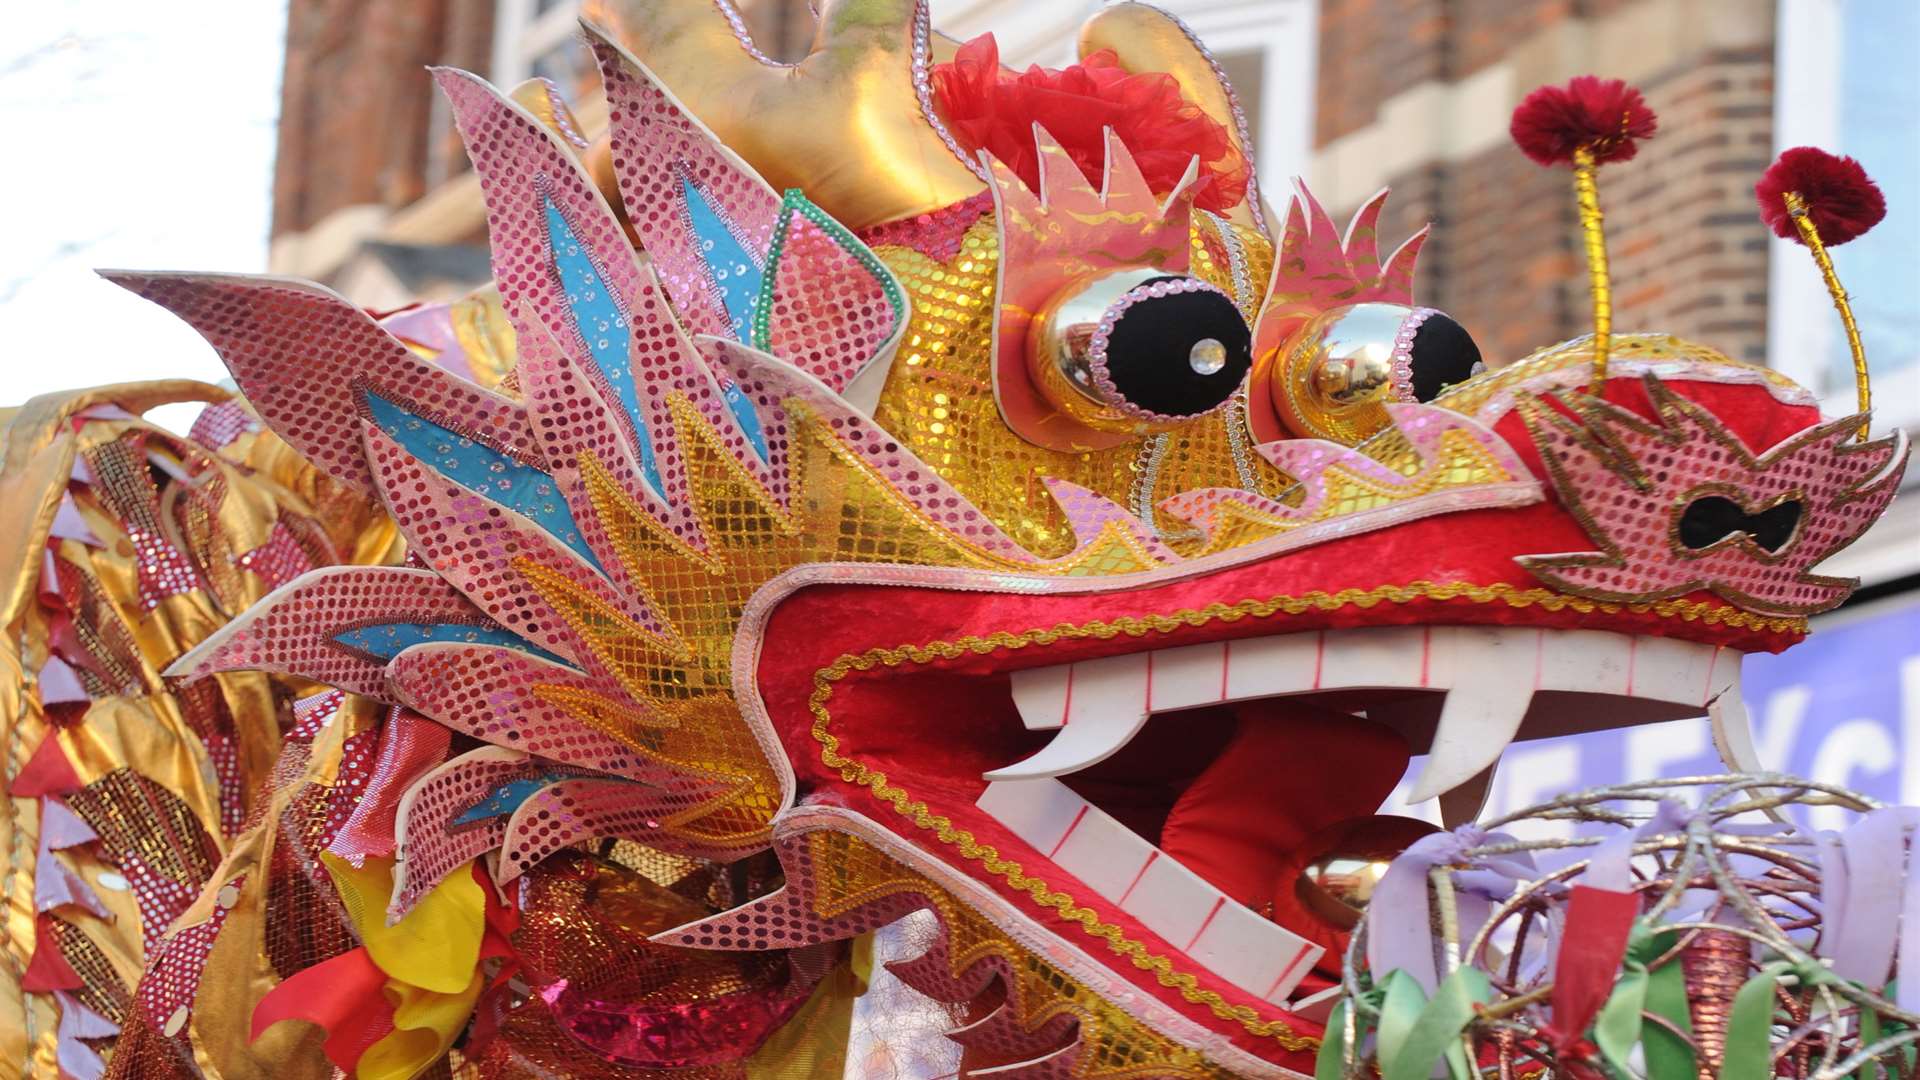 Chinese New Year celebrations start this weekend